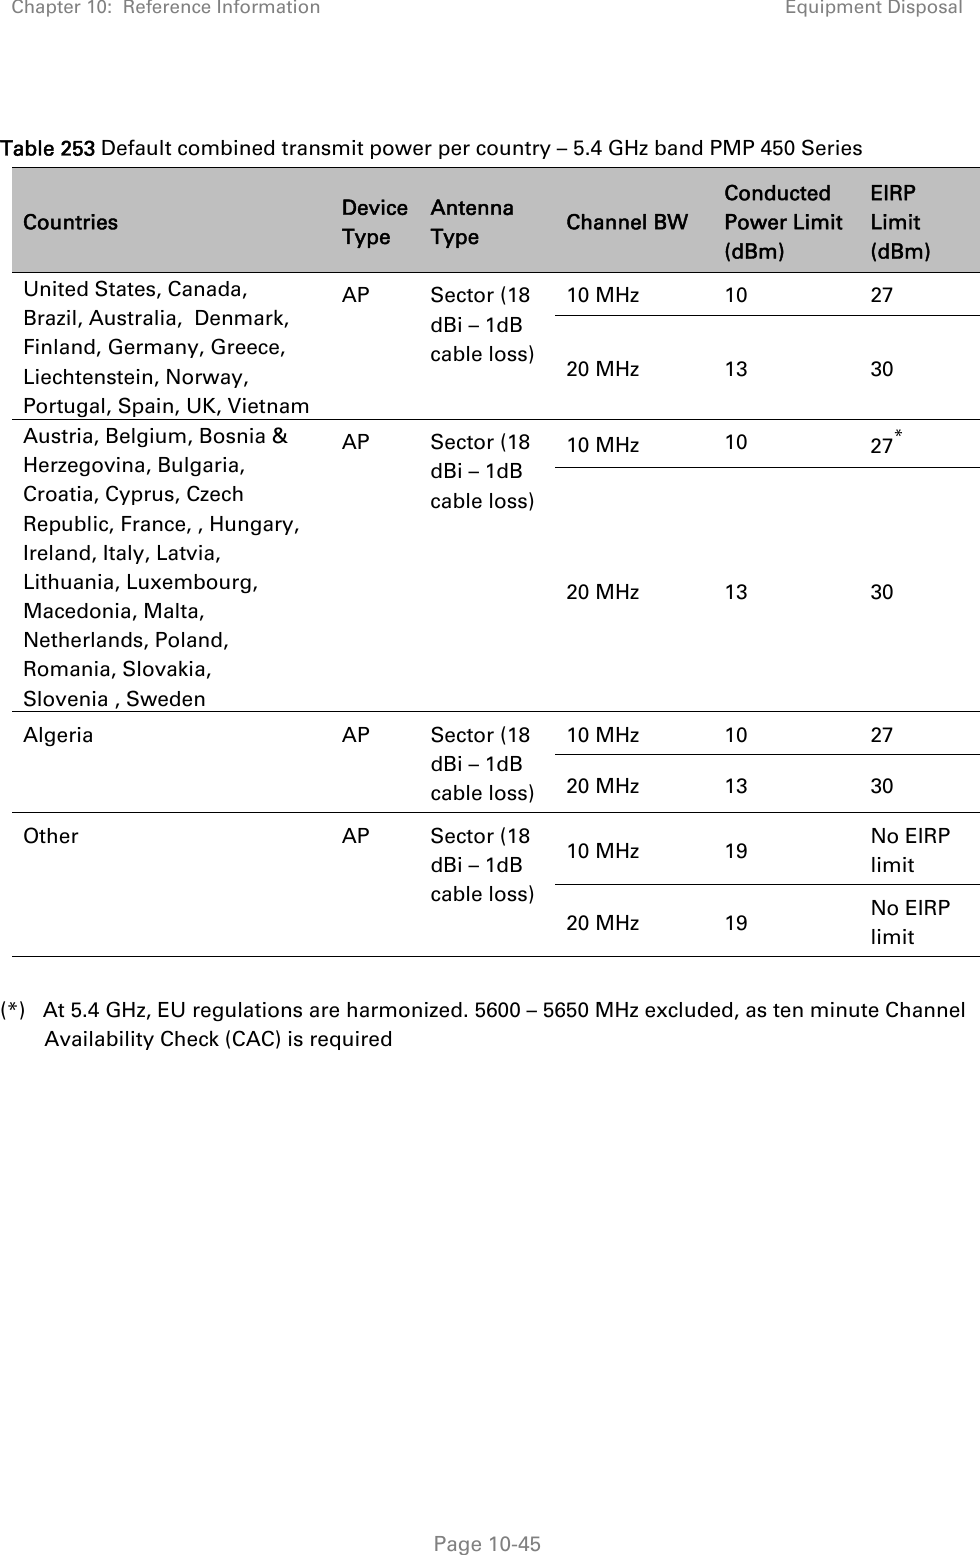 Chapter 10:  Reference Information Equipment Disposal   Page 10-45  Table 253 Default combined transmit power per country – 5.4 GHz band PMP 450 Series  Countries  Device Type Antenna Type  Channel BW Conducted Power Limit (dBm) EIRP Limit (dBm) United States, Canada, Brazil, Australia,  Denmark, Finland, Germany, Greece, Liechtenstein, Norway, Portugal, Spain, UK, Vietnam AP Sector (18 dBi – 1dB cable loss) 10 MHz  10  27 20 MHz  13  30 Austria, Belgium, Bosnia &amp; Herzegovina, Bulgaria, Croatia, Cyprus, Czech Republic, France, , Hungary, Ireland, Italy, Latvia, Lithuania, Luxembourg, Macedonia, Malta, Netherlands, Poland, Romania, Slovakia, Slovenia , Sweden AP Sector (18 dBi – 1dB cable loss) 10 MHz  10  27* 20 MHz  13  30 Algeria AP Sector (18 dBi – 1dB cable loss) 10 MHz  10  27 20 MHz  13  30 Other AP Sector (18 dBi – 1dB cable loss) 10 MHz  19  No EIRP limit 20 MHz  19  No EIRP  limit  (*)   At 5.4 GHz, EU regulations are harmonized. 5600 – 5650 MHz excluded, as ten minute Channel Availability Check (CAC) is required   